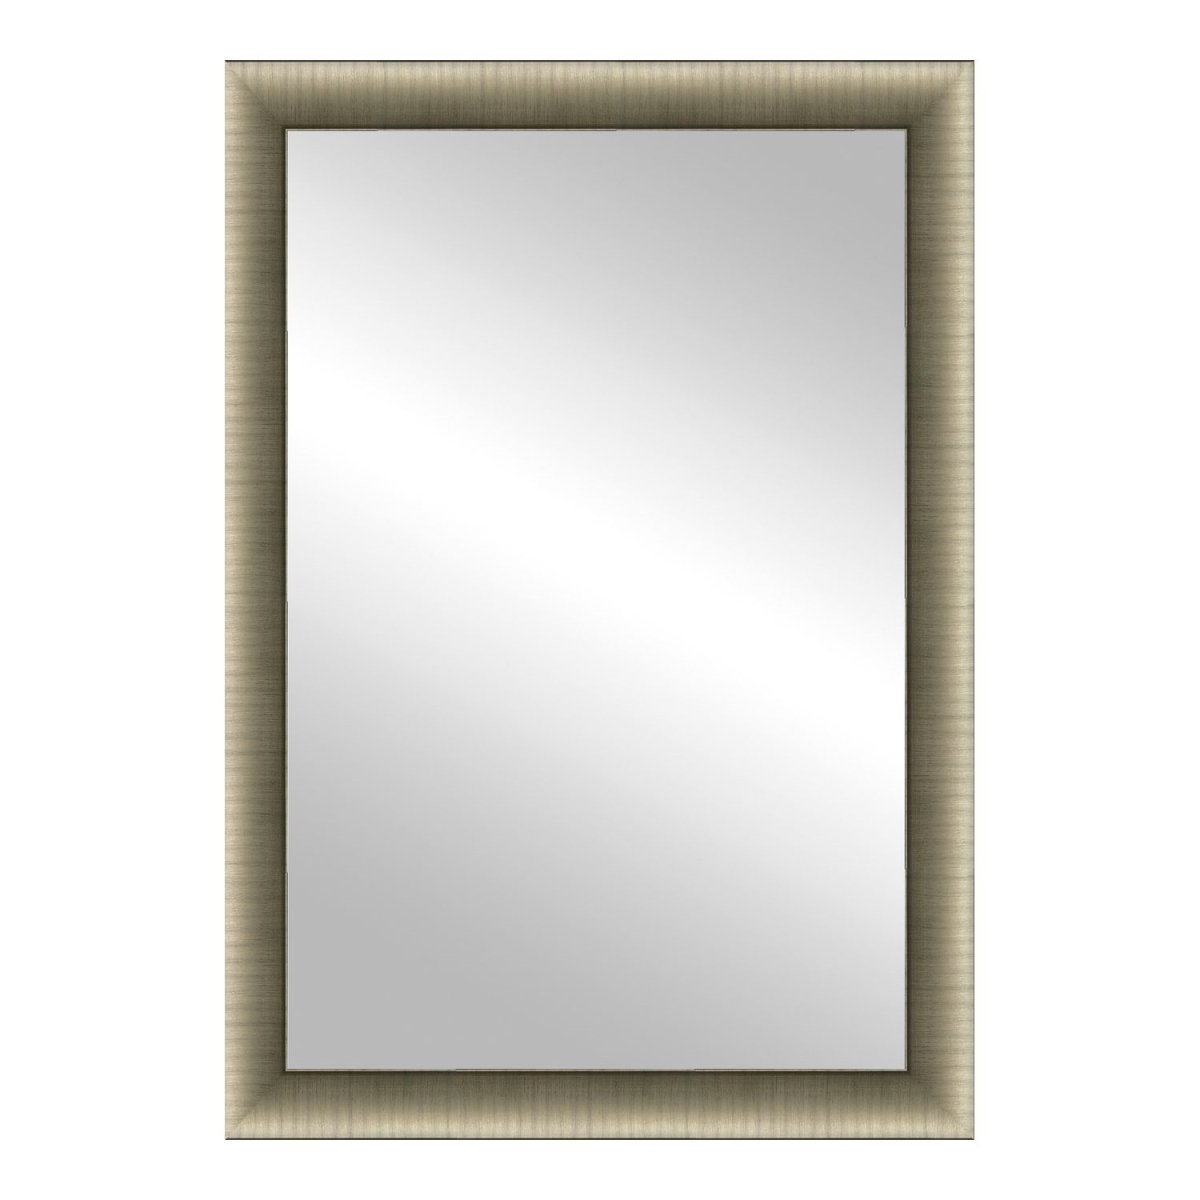 Picture of Timeless Frames 55377 24 x 30 in. Mari Framed Mirror, Champagne